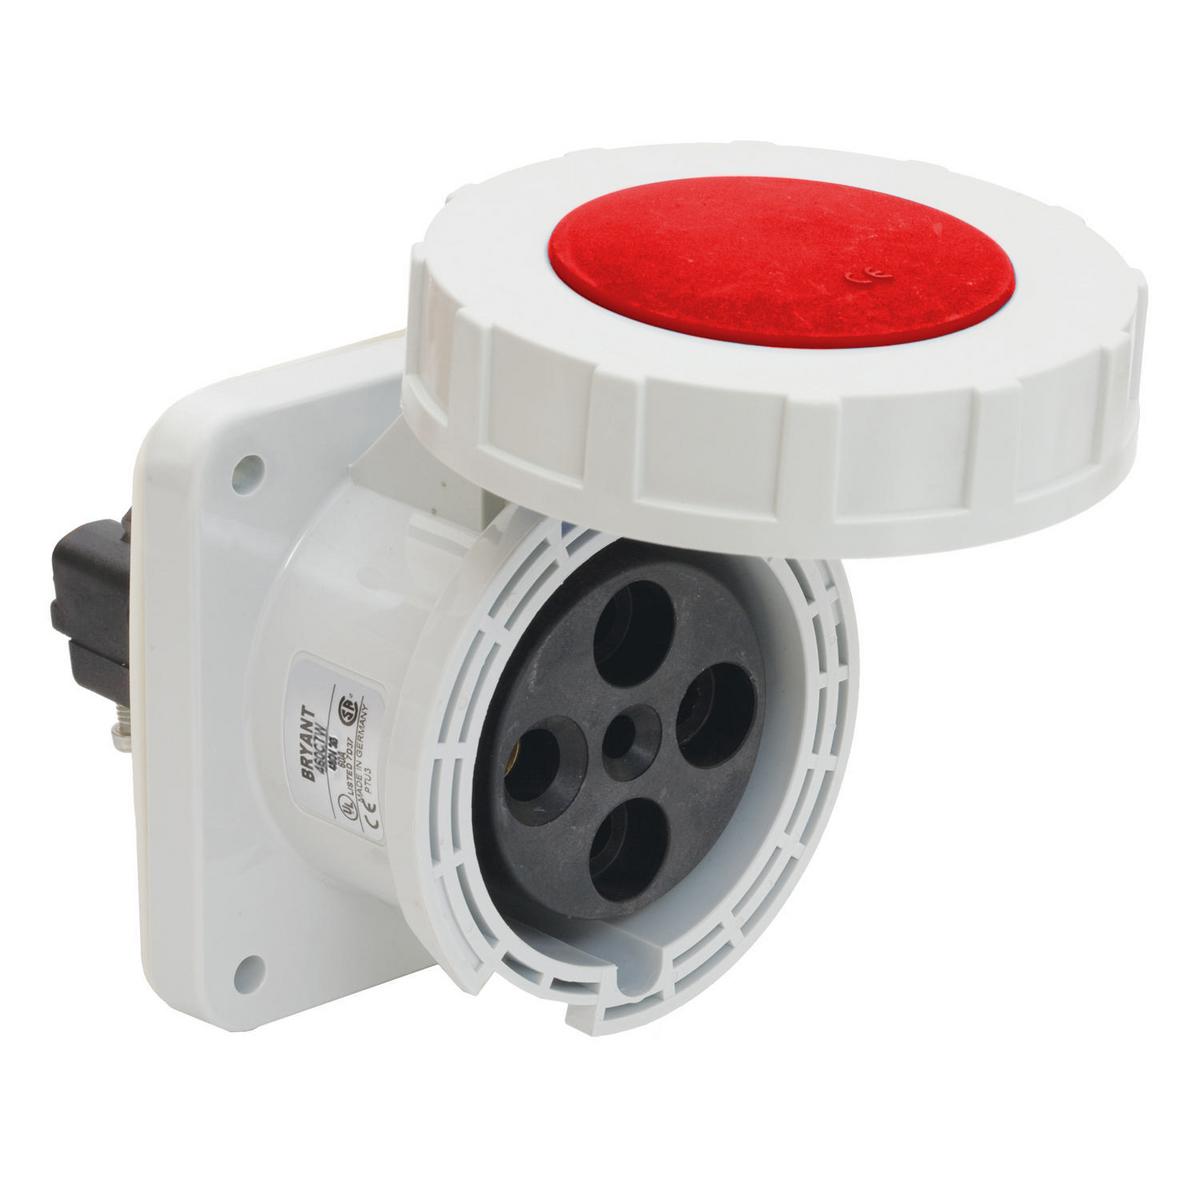 Hubbell 520R7W Heavy Duty Products, IEC Pin and Sleeve Devices, Industrial Grade, Female Receptacle, 20A 3-Phase Wye 277/480V AC, 4-Pole 5-Wire Grounding, Screw Terminals, Red, Watertight  ; Watertight